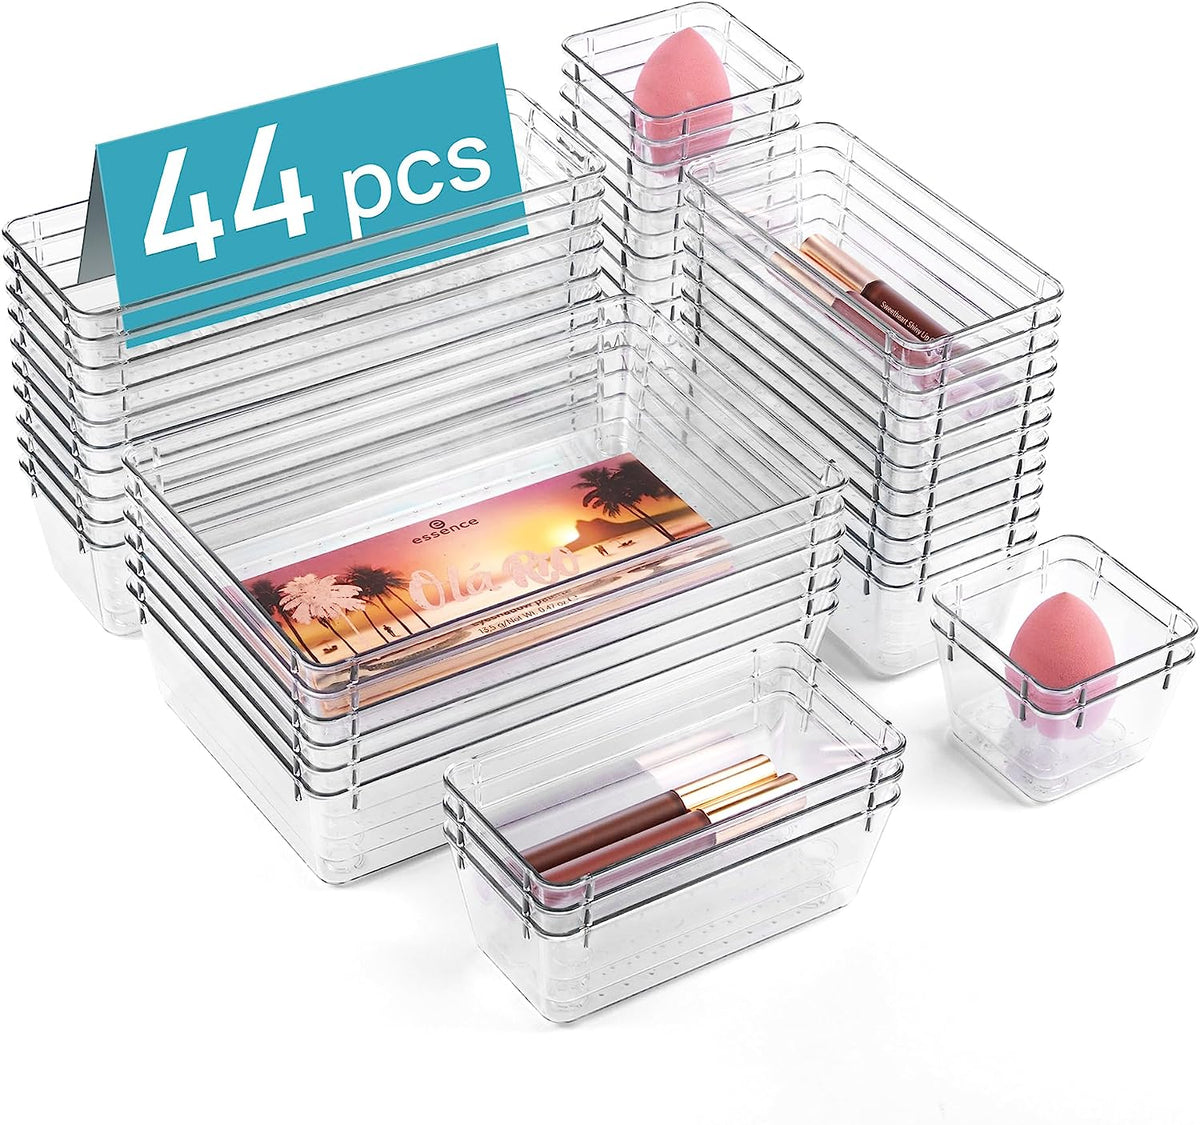 44 PCS Clear Plastic Drawer Organizers Set, 4-Size Versatile Bathroom and Vanity Organizer Trays, Non-Slip Storage Containers for Makeup, Jewelries, Bedroom，Kitchen Utensils and Office